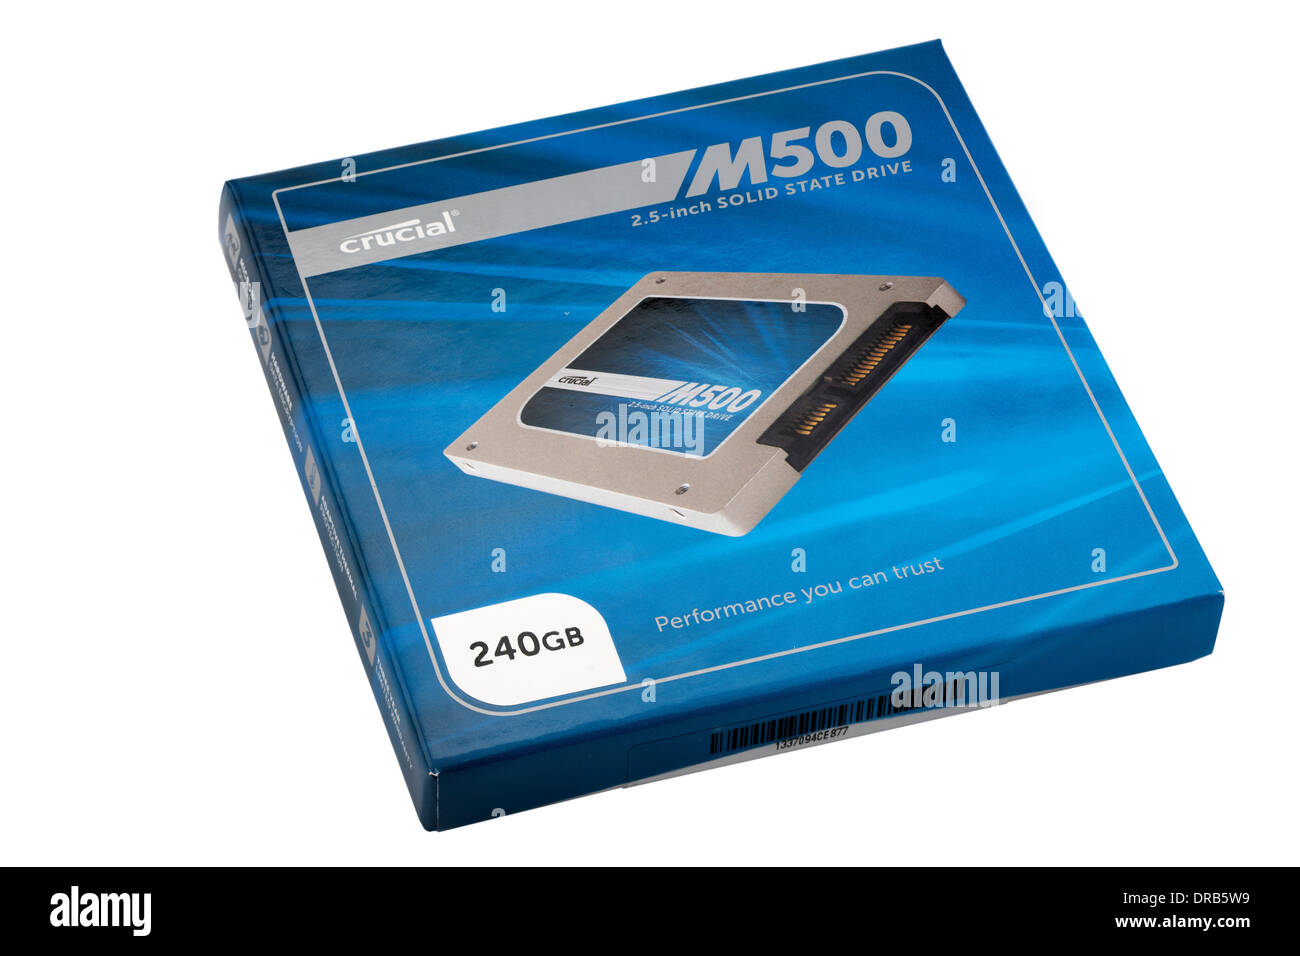 Crucial M500 boxed 2.5 inch solid state drive 240gb Stock Photo